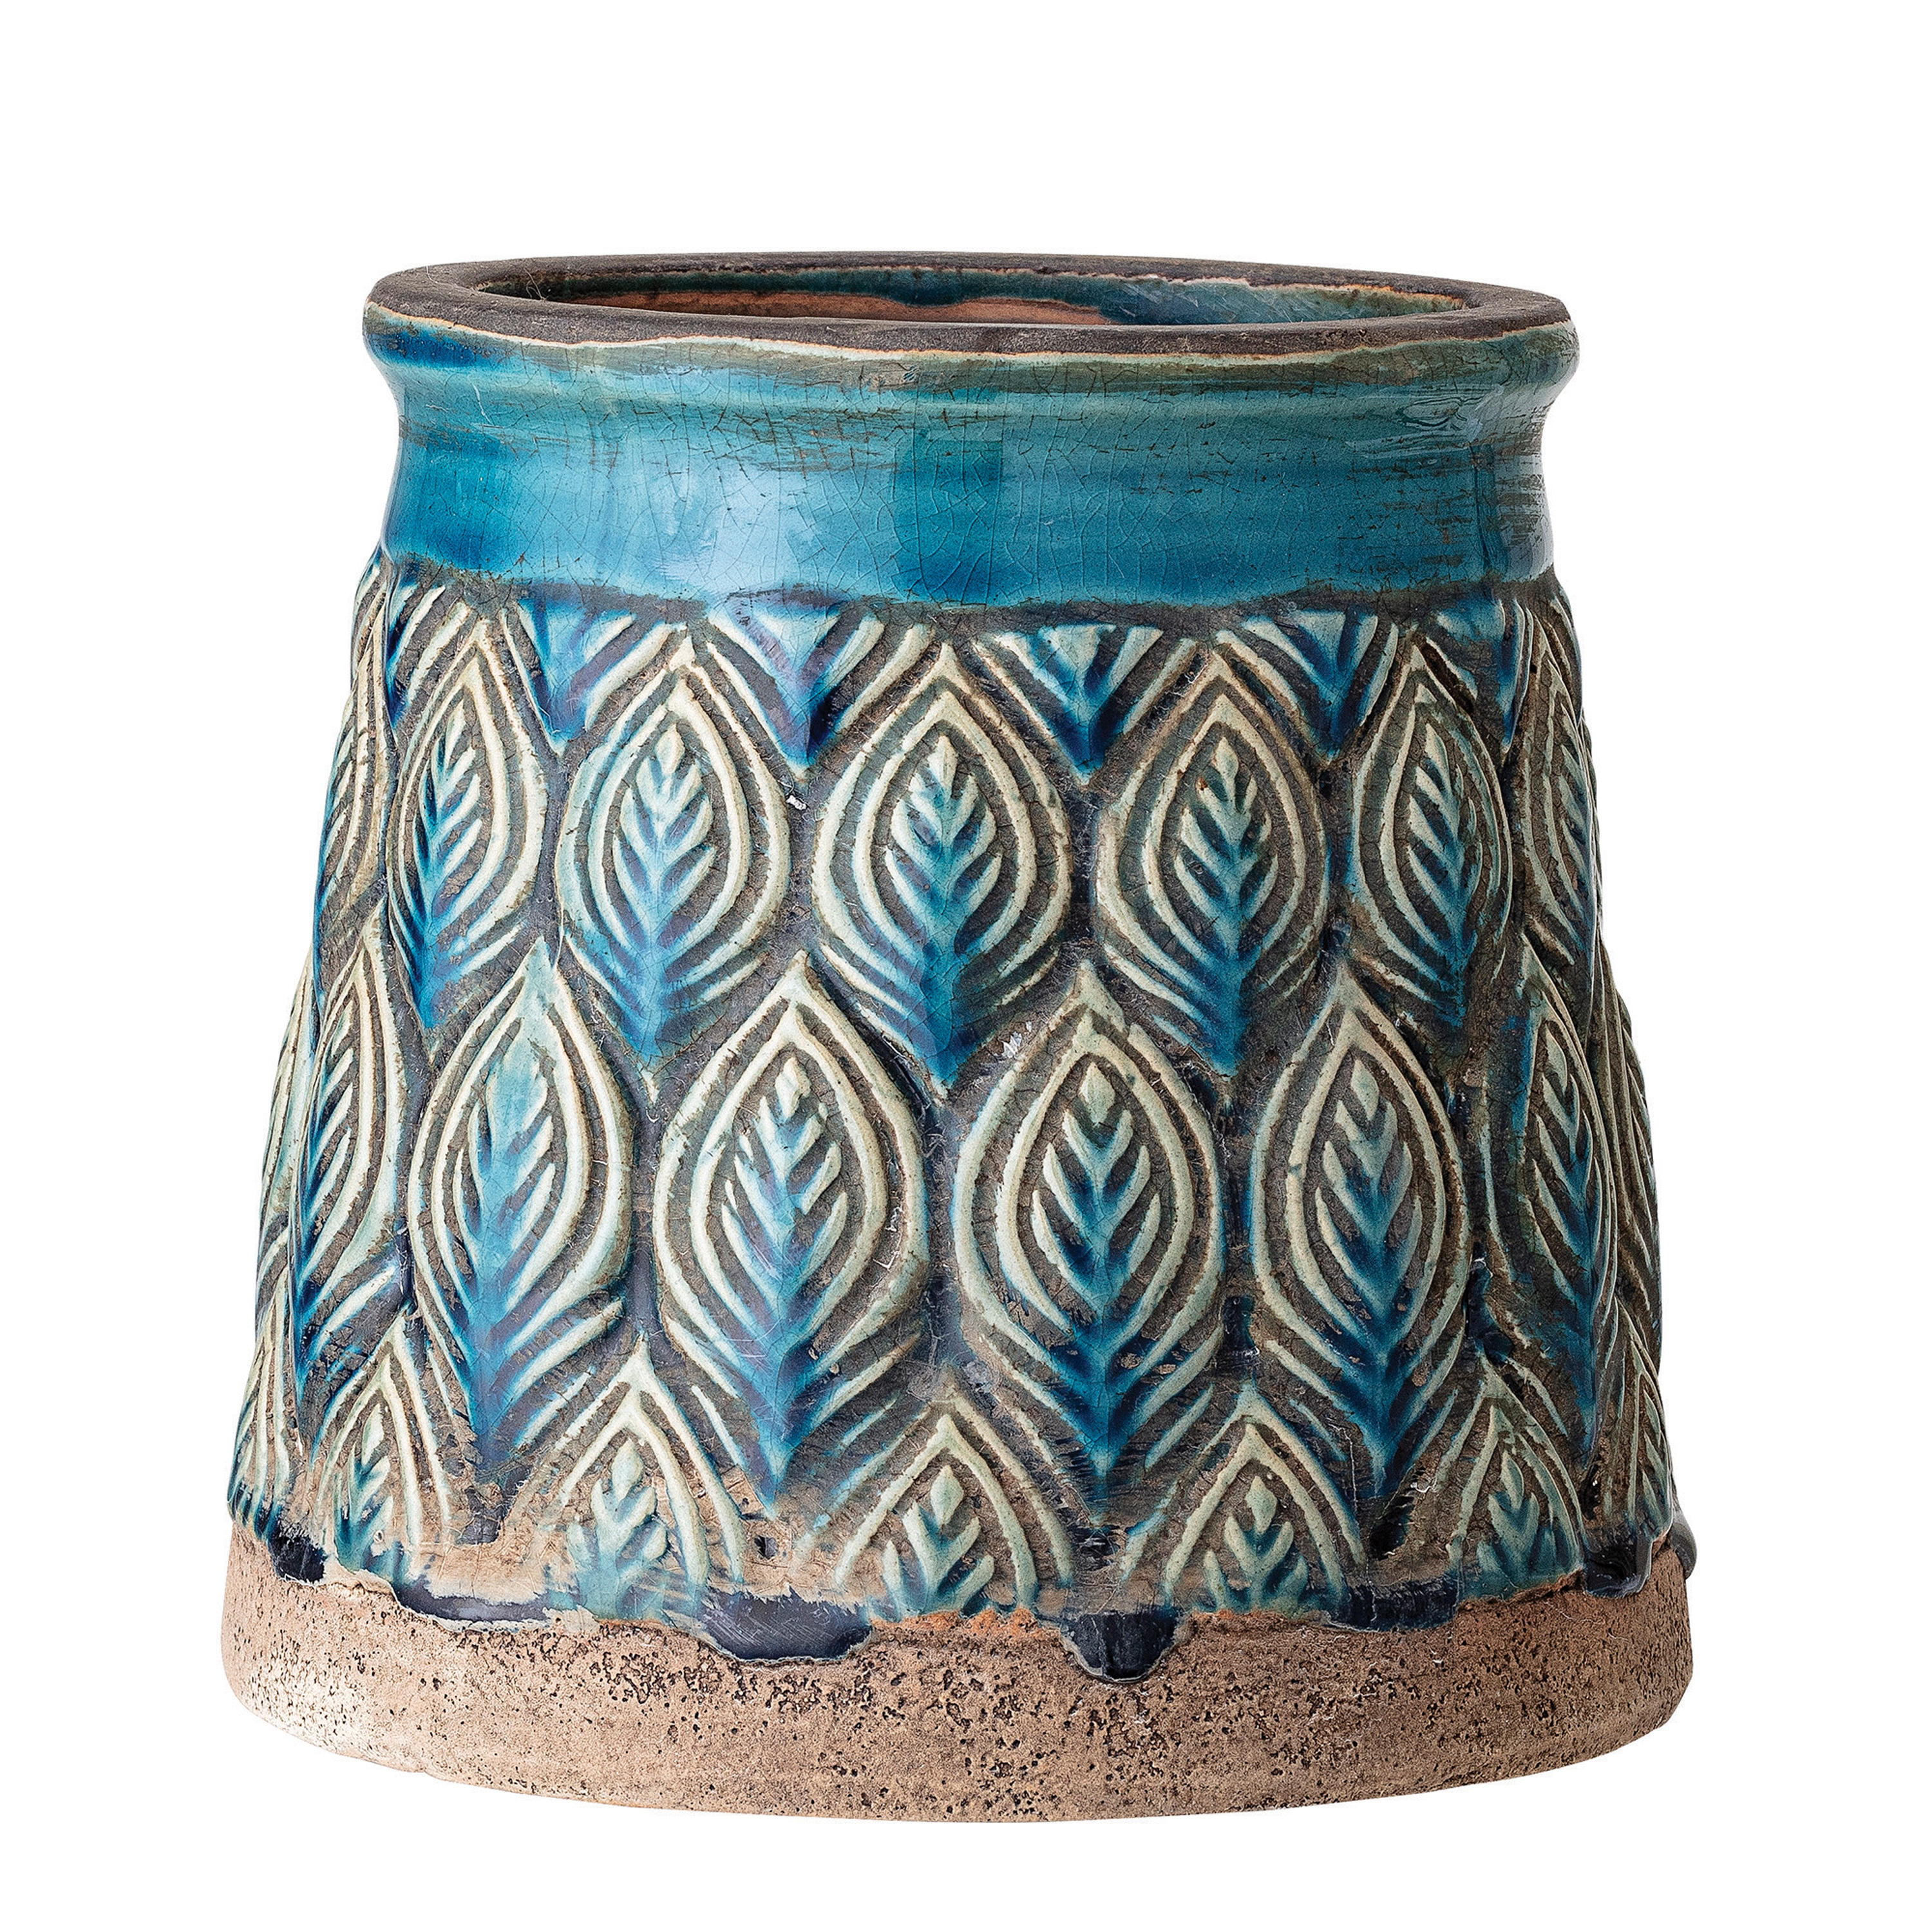 Embossed Teal Blue Terracotta Planter with Peacock Feather Design & Reactive Glaze Finish (Each one will vary) - Image 0